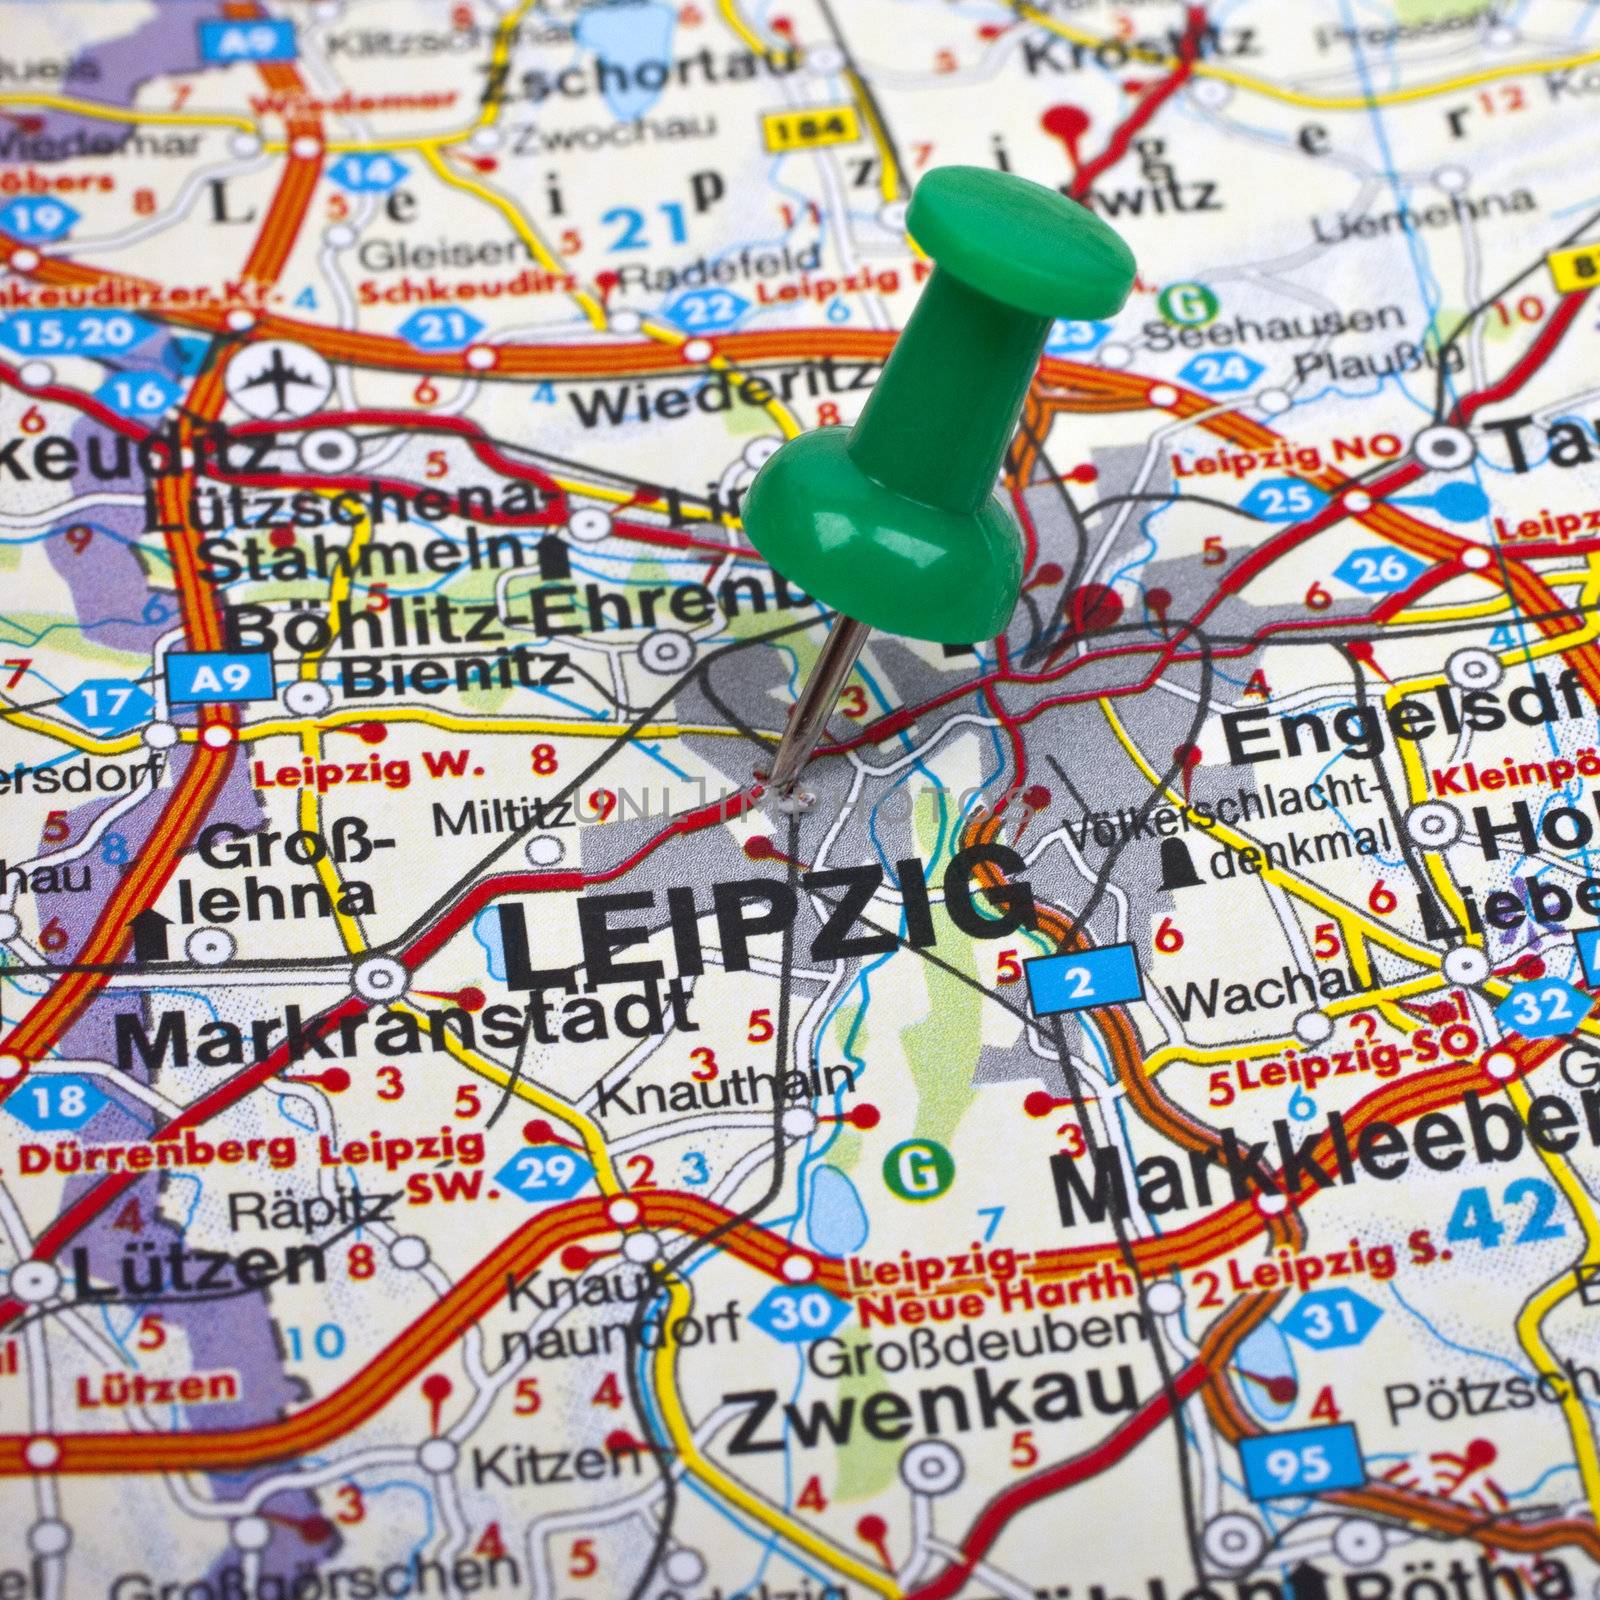 Leipzig pin-pointed on a map.